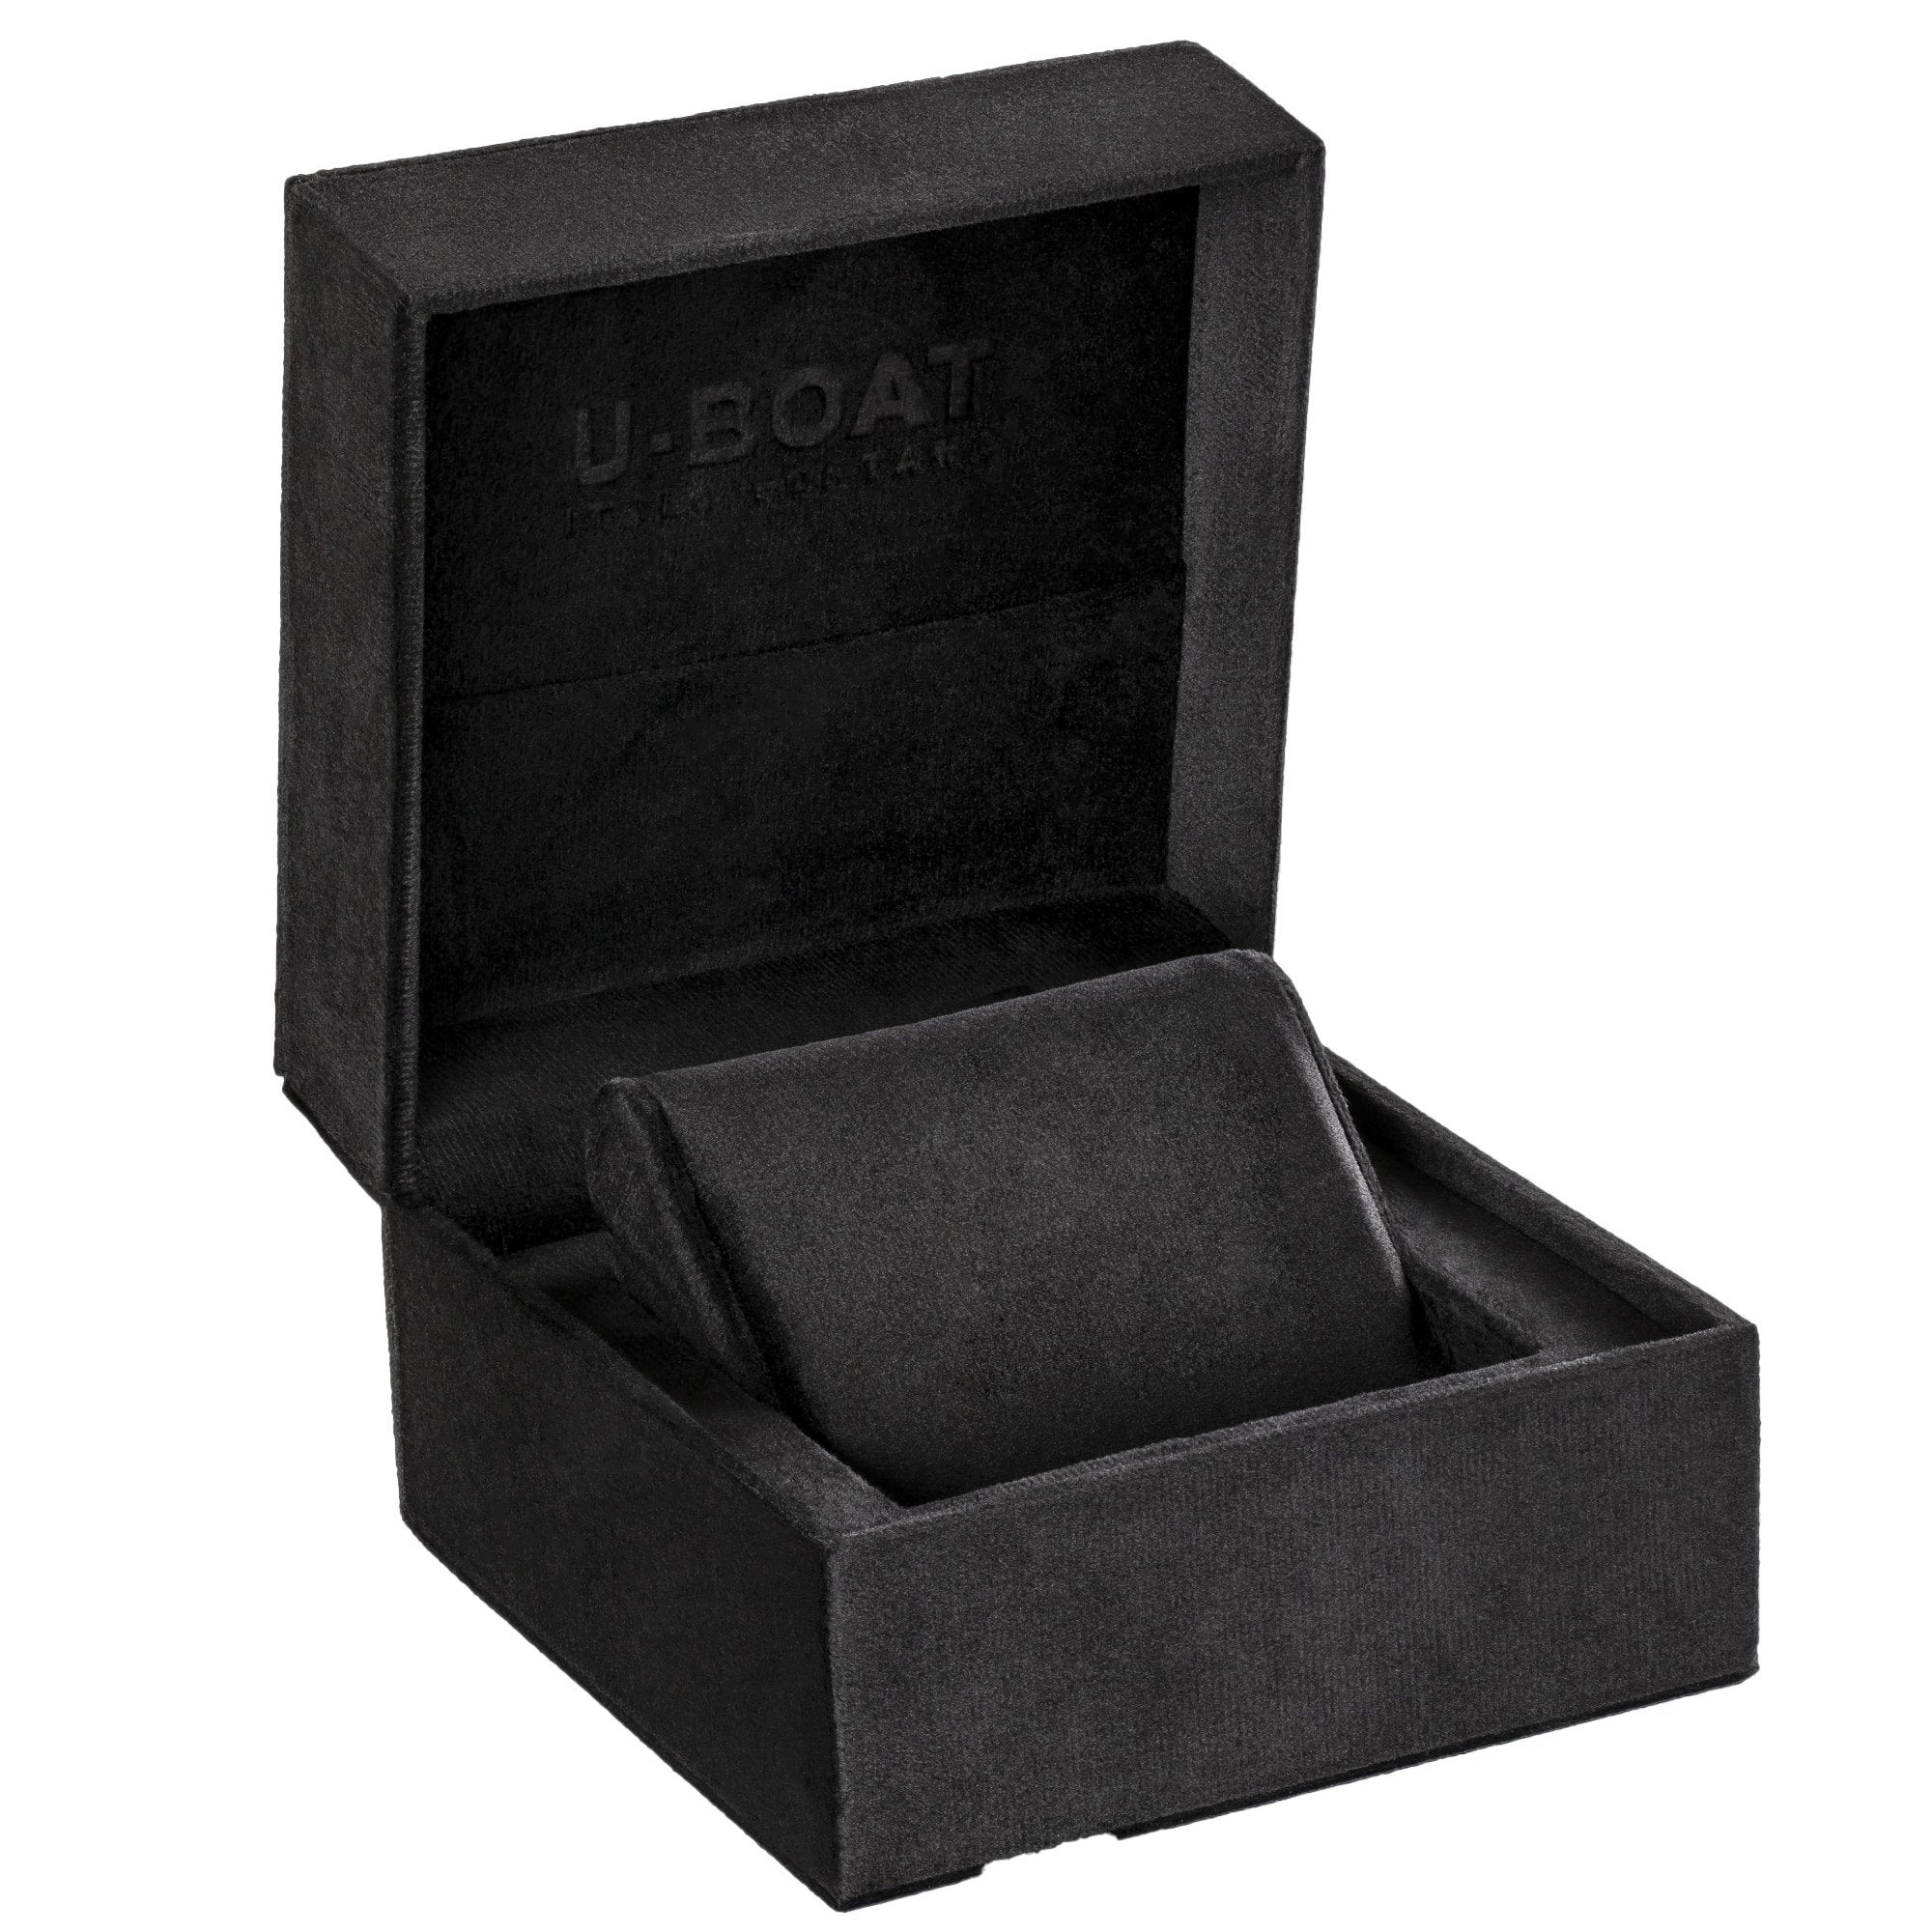 U-boat Sommerso Blue_case_mywow2